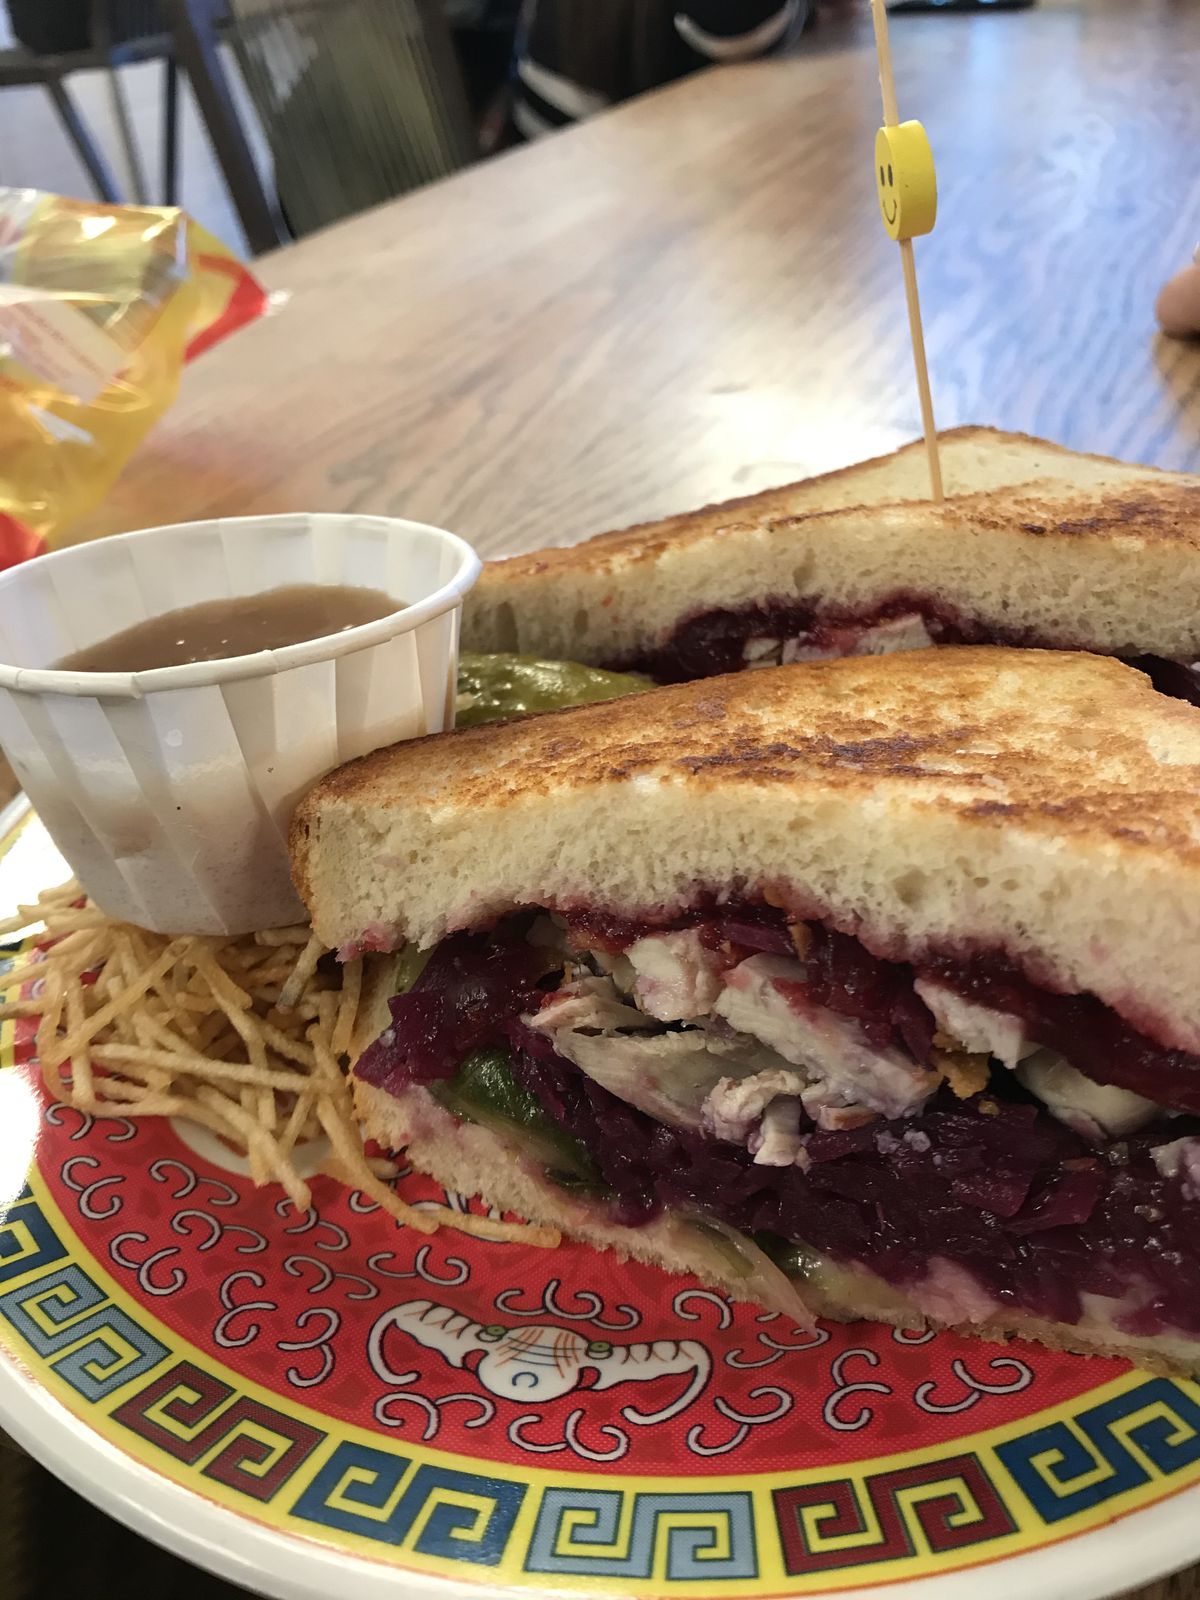 Visions’ Christmas sandwich is one of London’s best in 2019